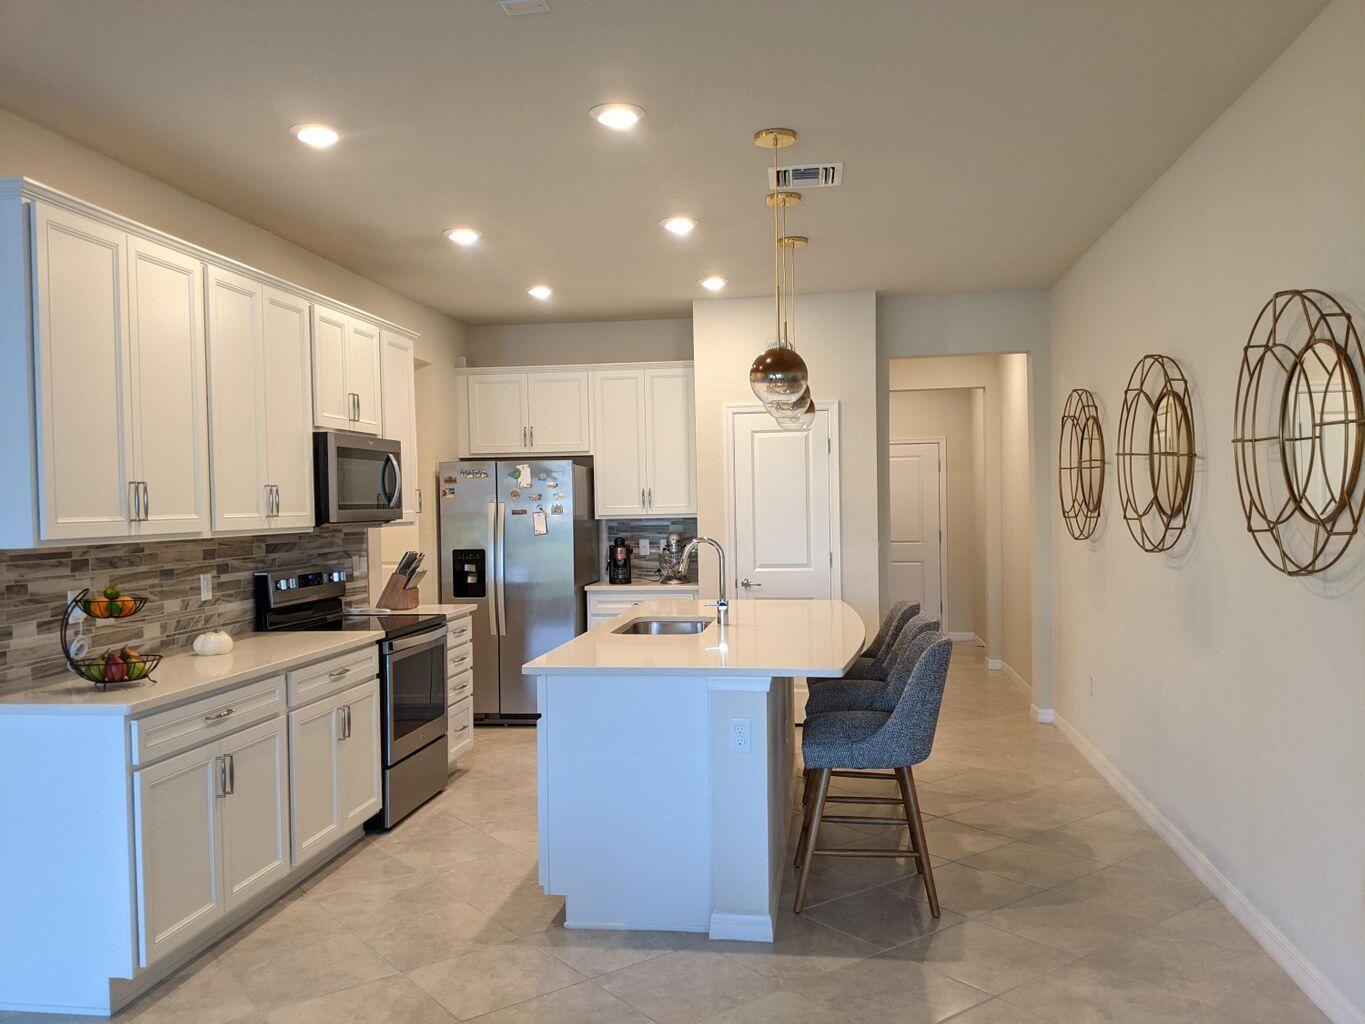 a open kitchen with stainless steel appliances granite countertop a stove top oven a sink dishwasher a refrigerator and white cabinets with wooden floor